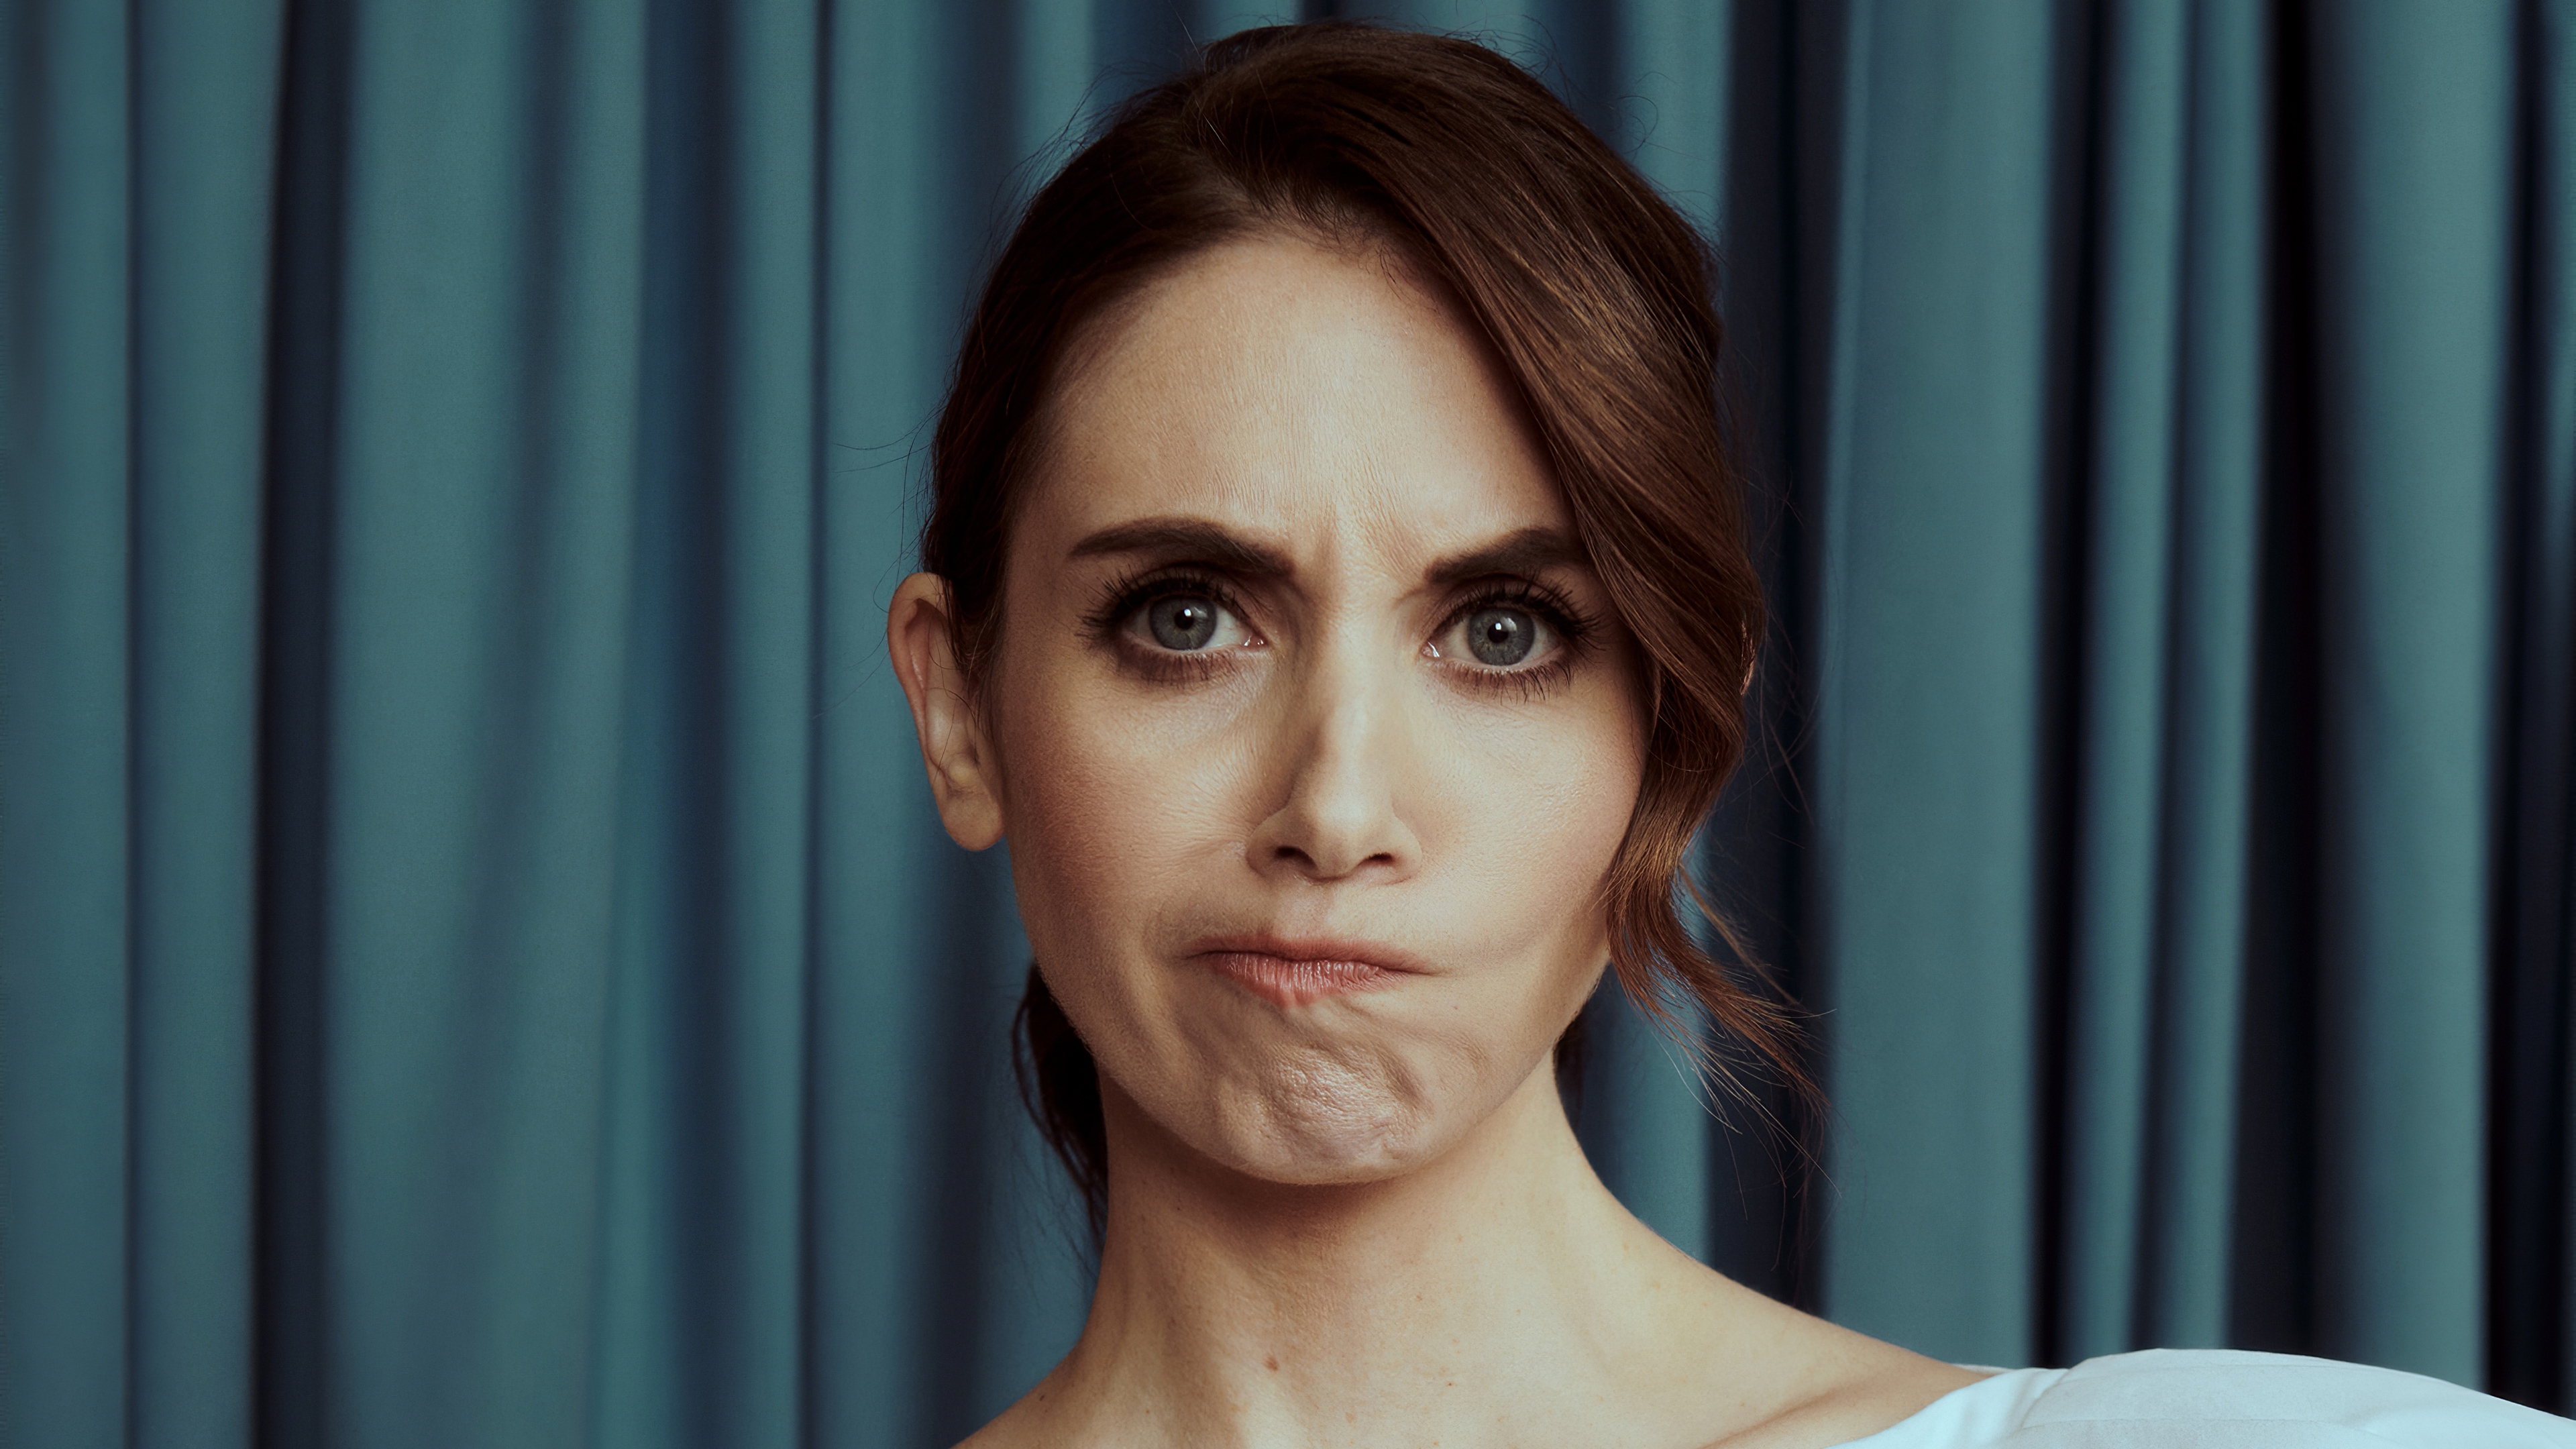 New Alison Brie 2020 Actress Wallpapers